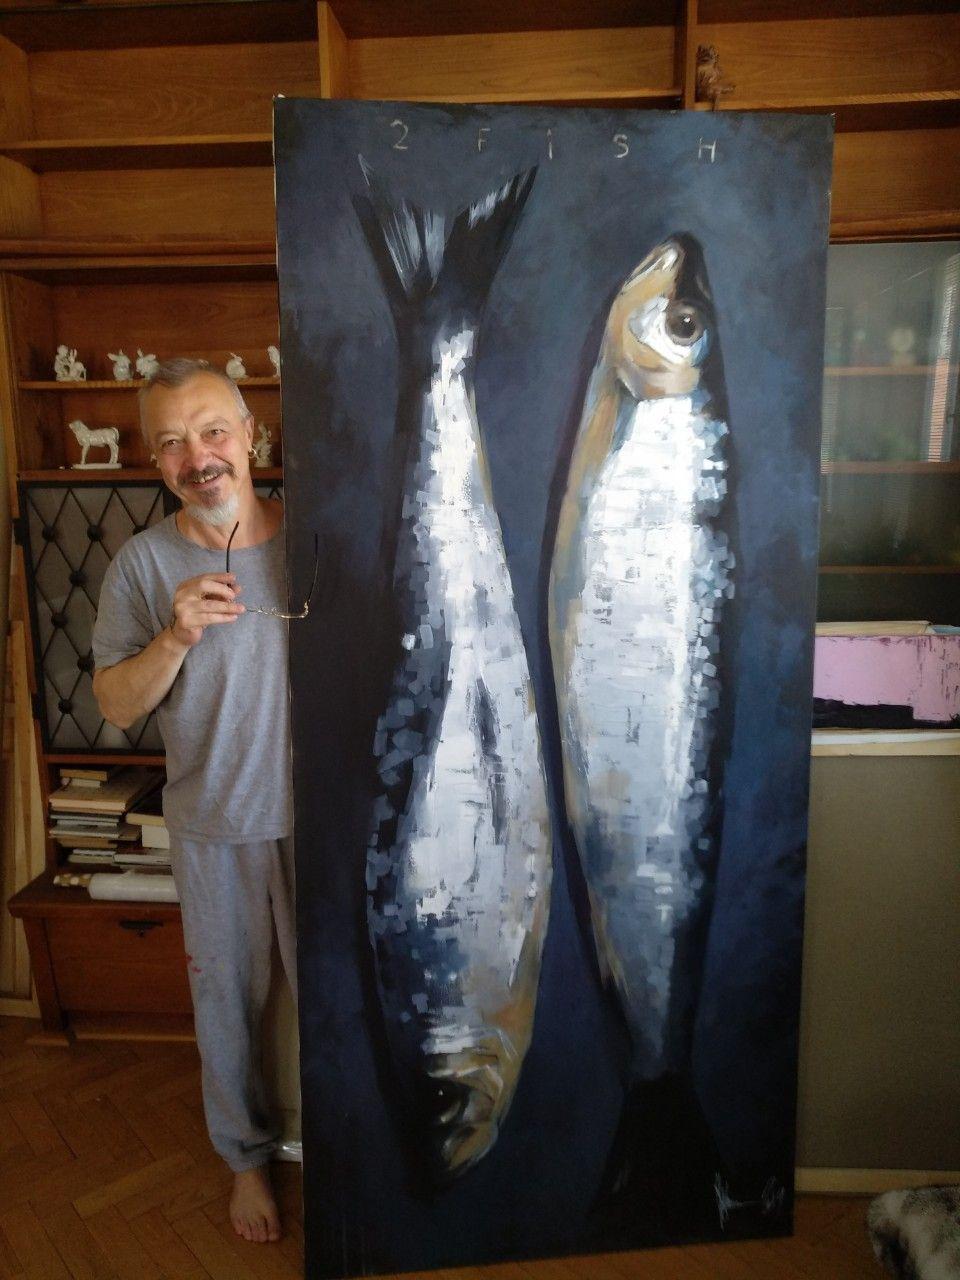 2 fish., Painting, Oil on Canvas 1